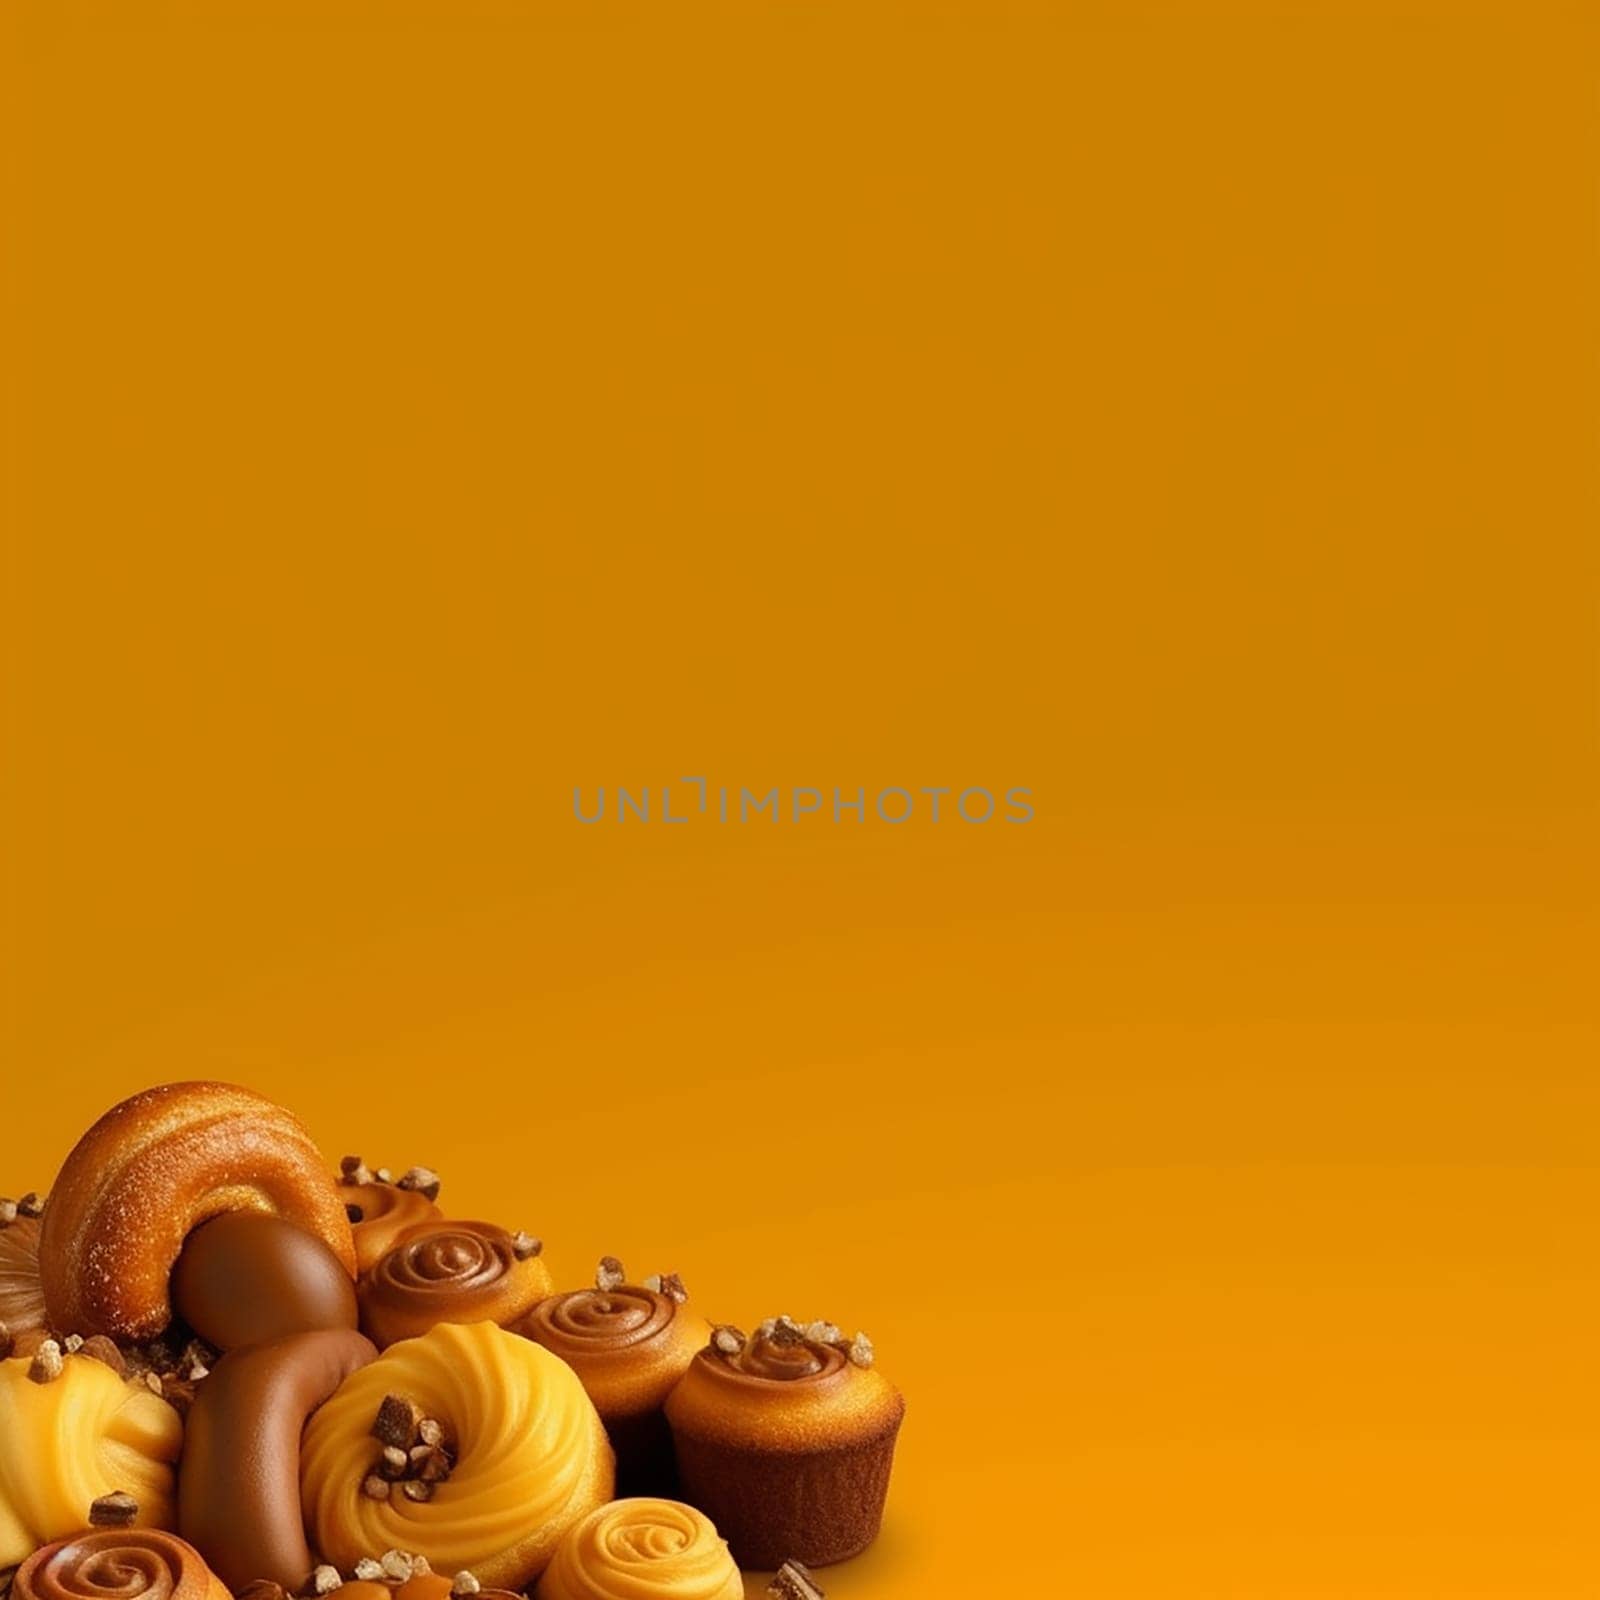 Assorted pastries with chocolate on a yellow background.